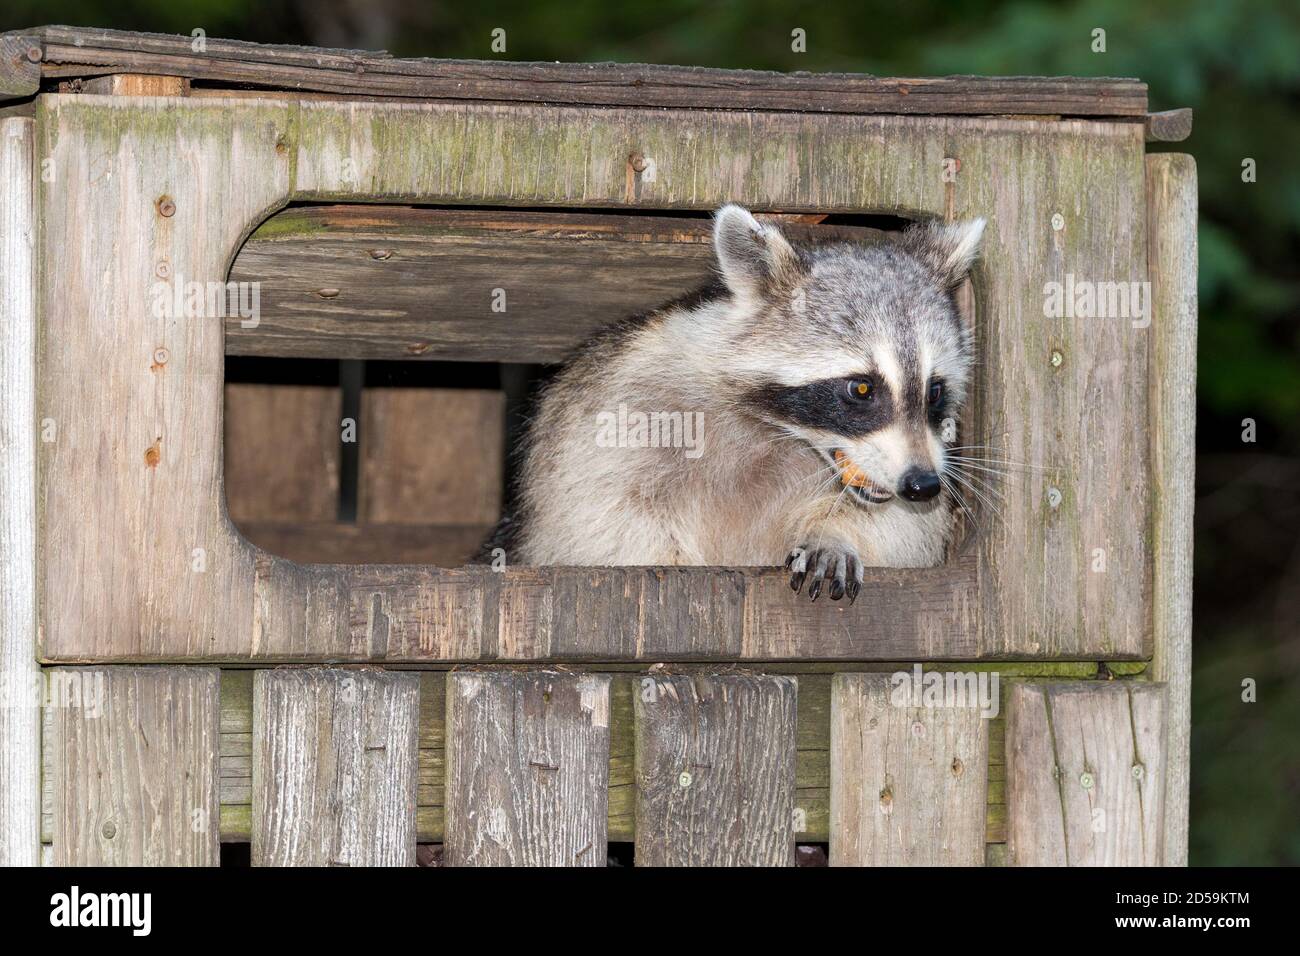 A raccoon in a wooden garbage bin.The bin has a flap in the front which is held open by the raccoon. He has food in his mouth. Stock Photo